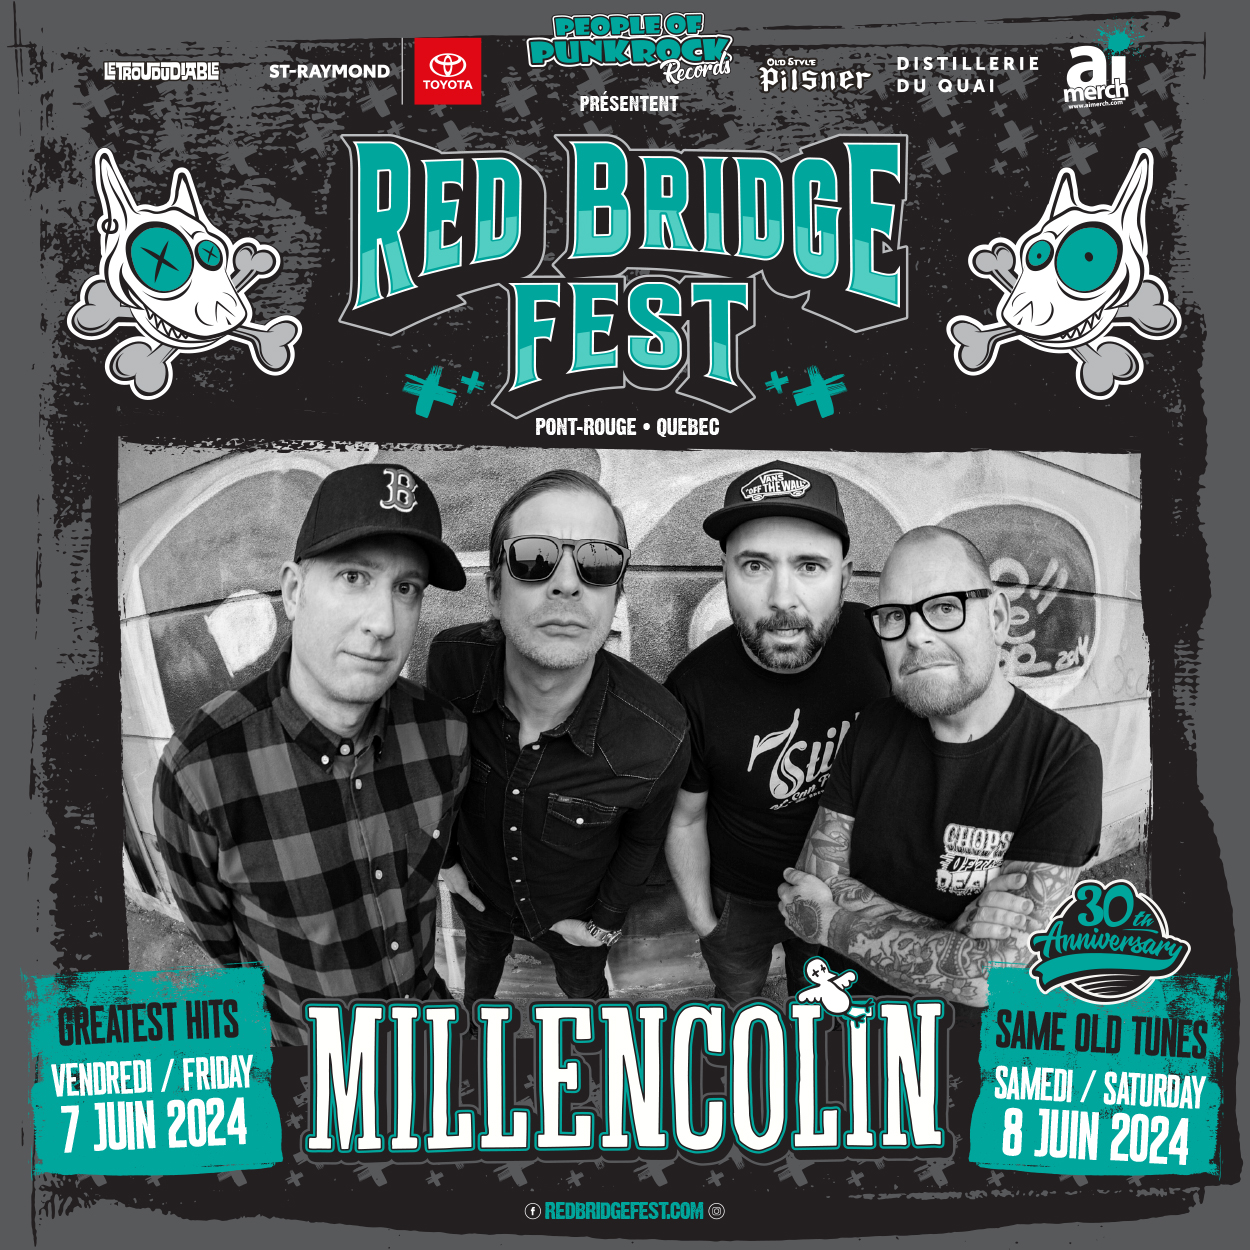 Announcing shows 2024 Millencolin